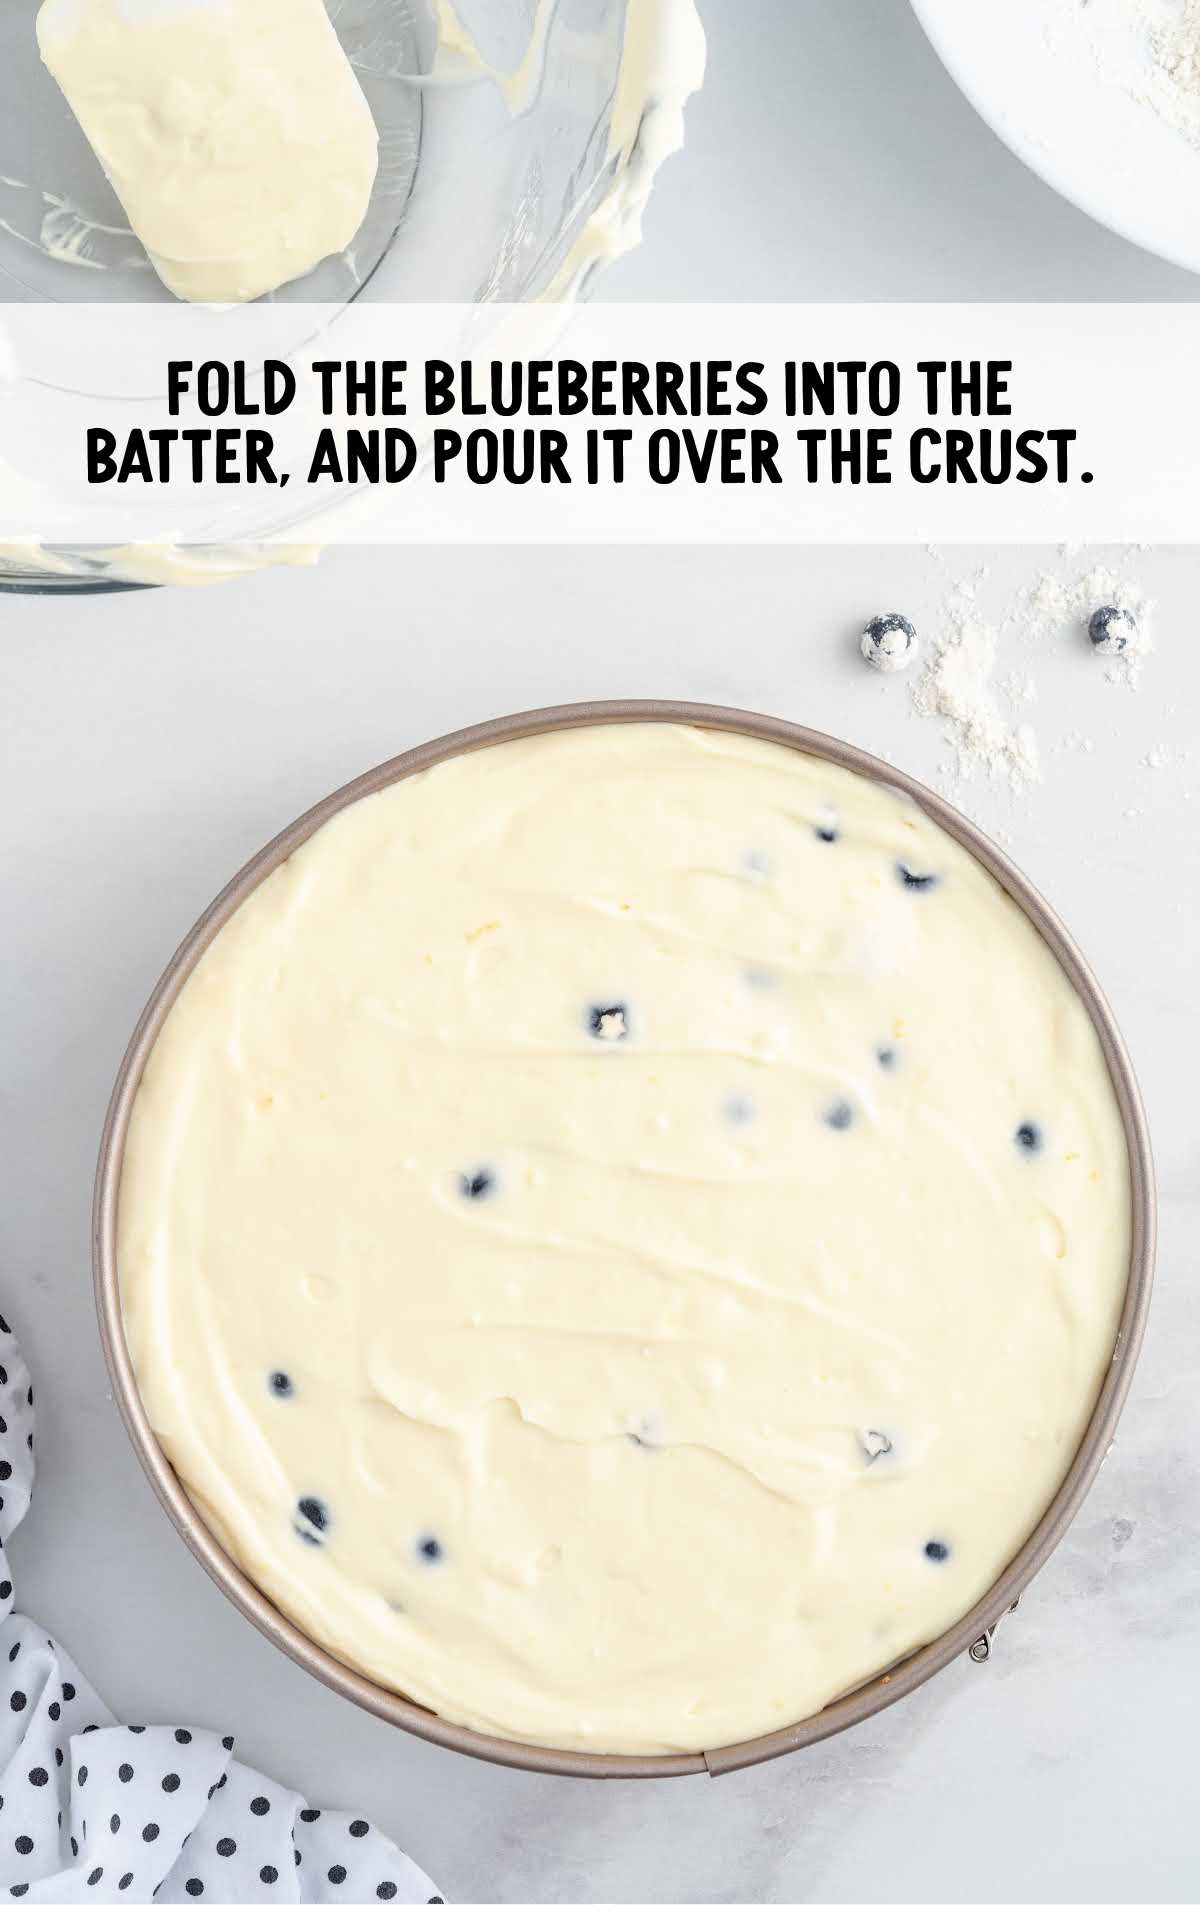 blueberries folded into the batter in a pan